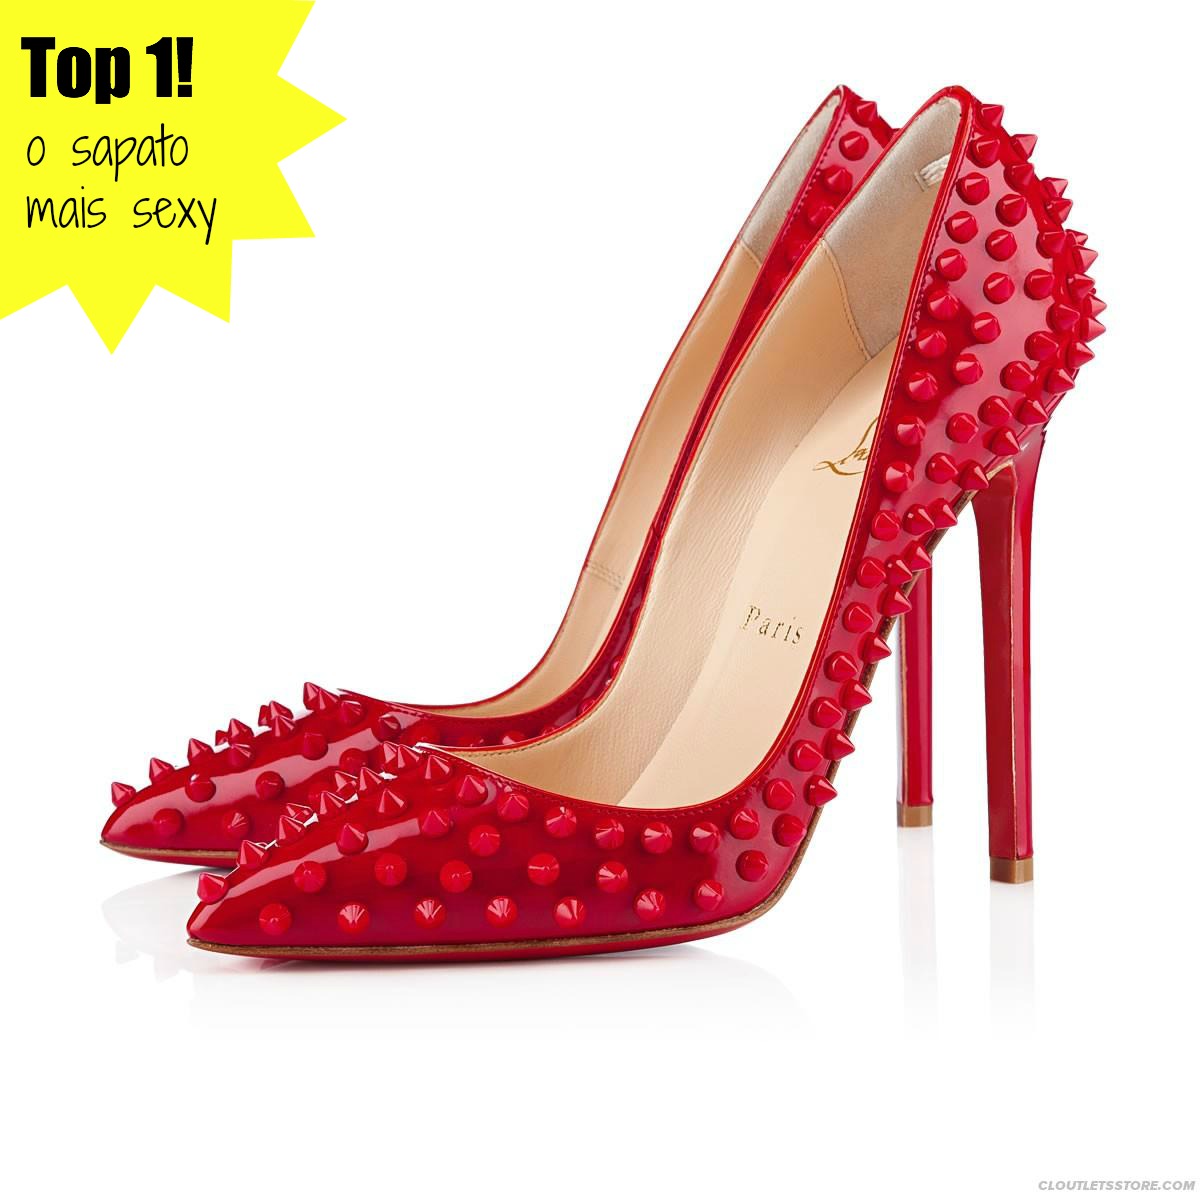 Louboutin-Pigalle-Spikes-all-red-Blog-da-Lari-Duarte-.com-Saks-Fifthe-Avenue-Sexy-Shoes-Competion